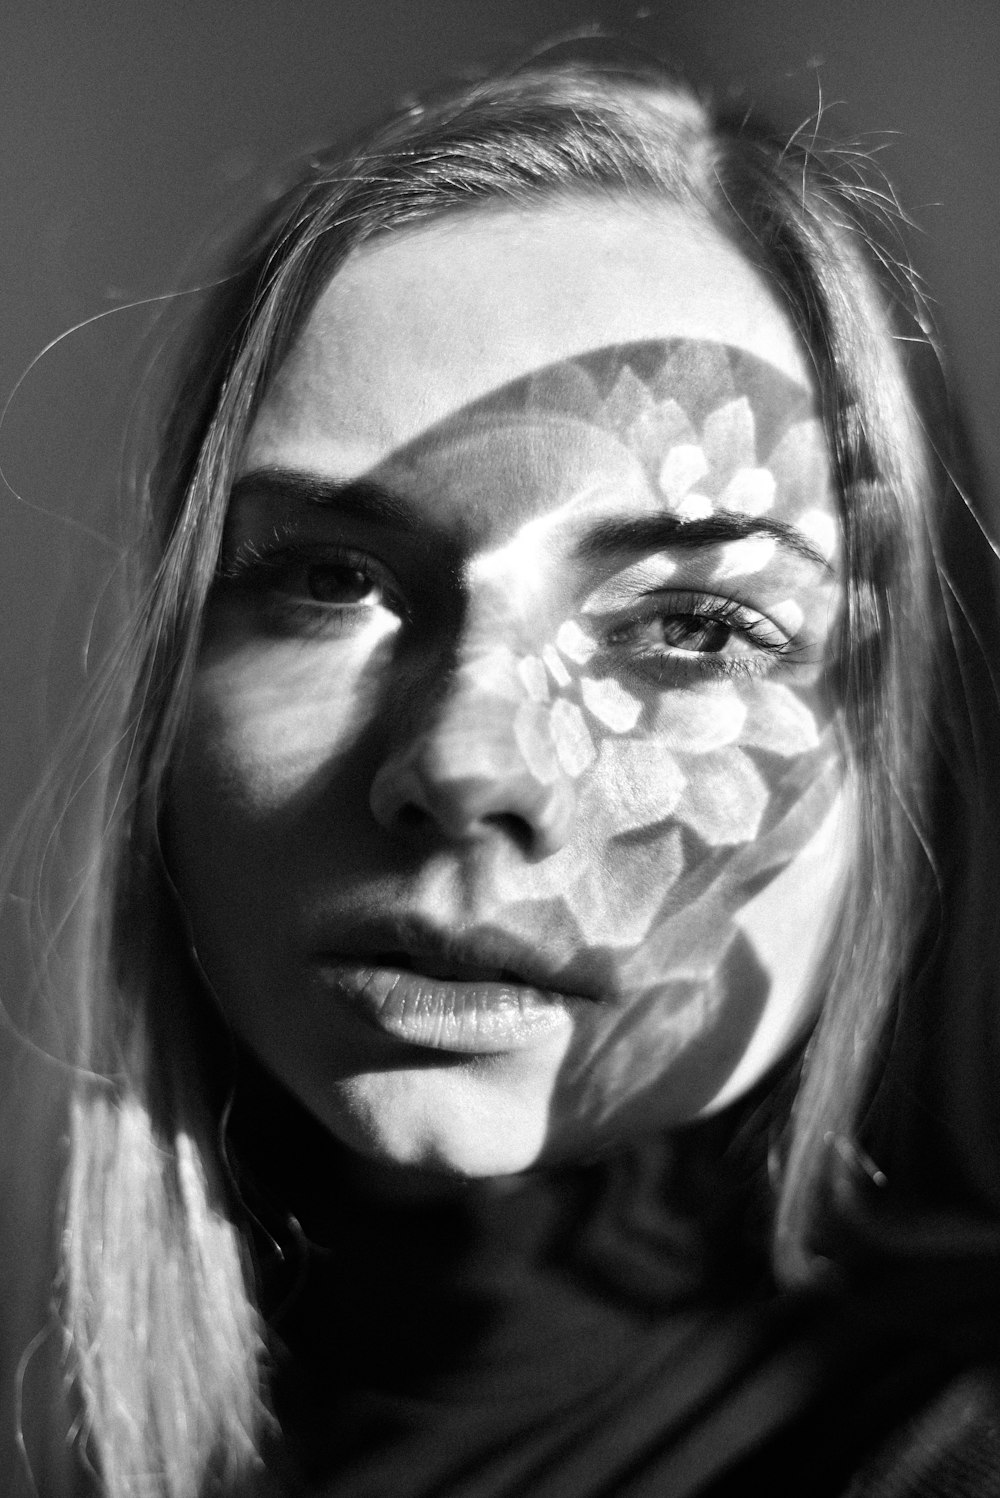 grayscale photo of woman with white and black floral face paint